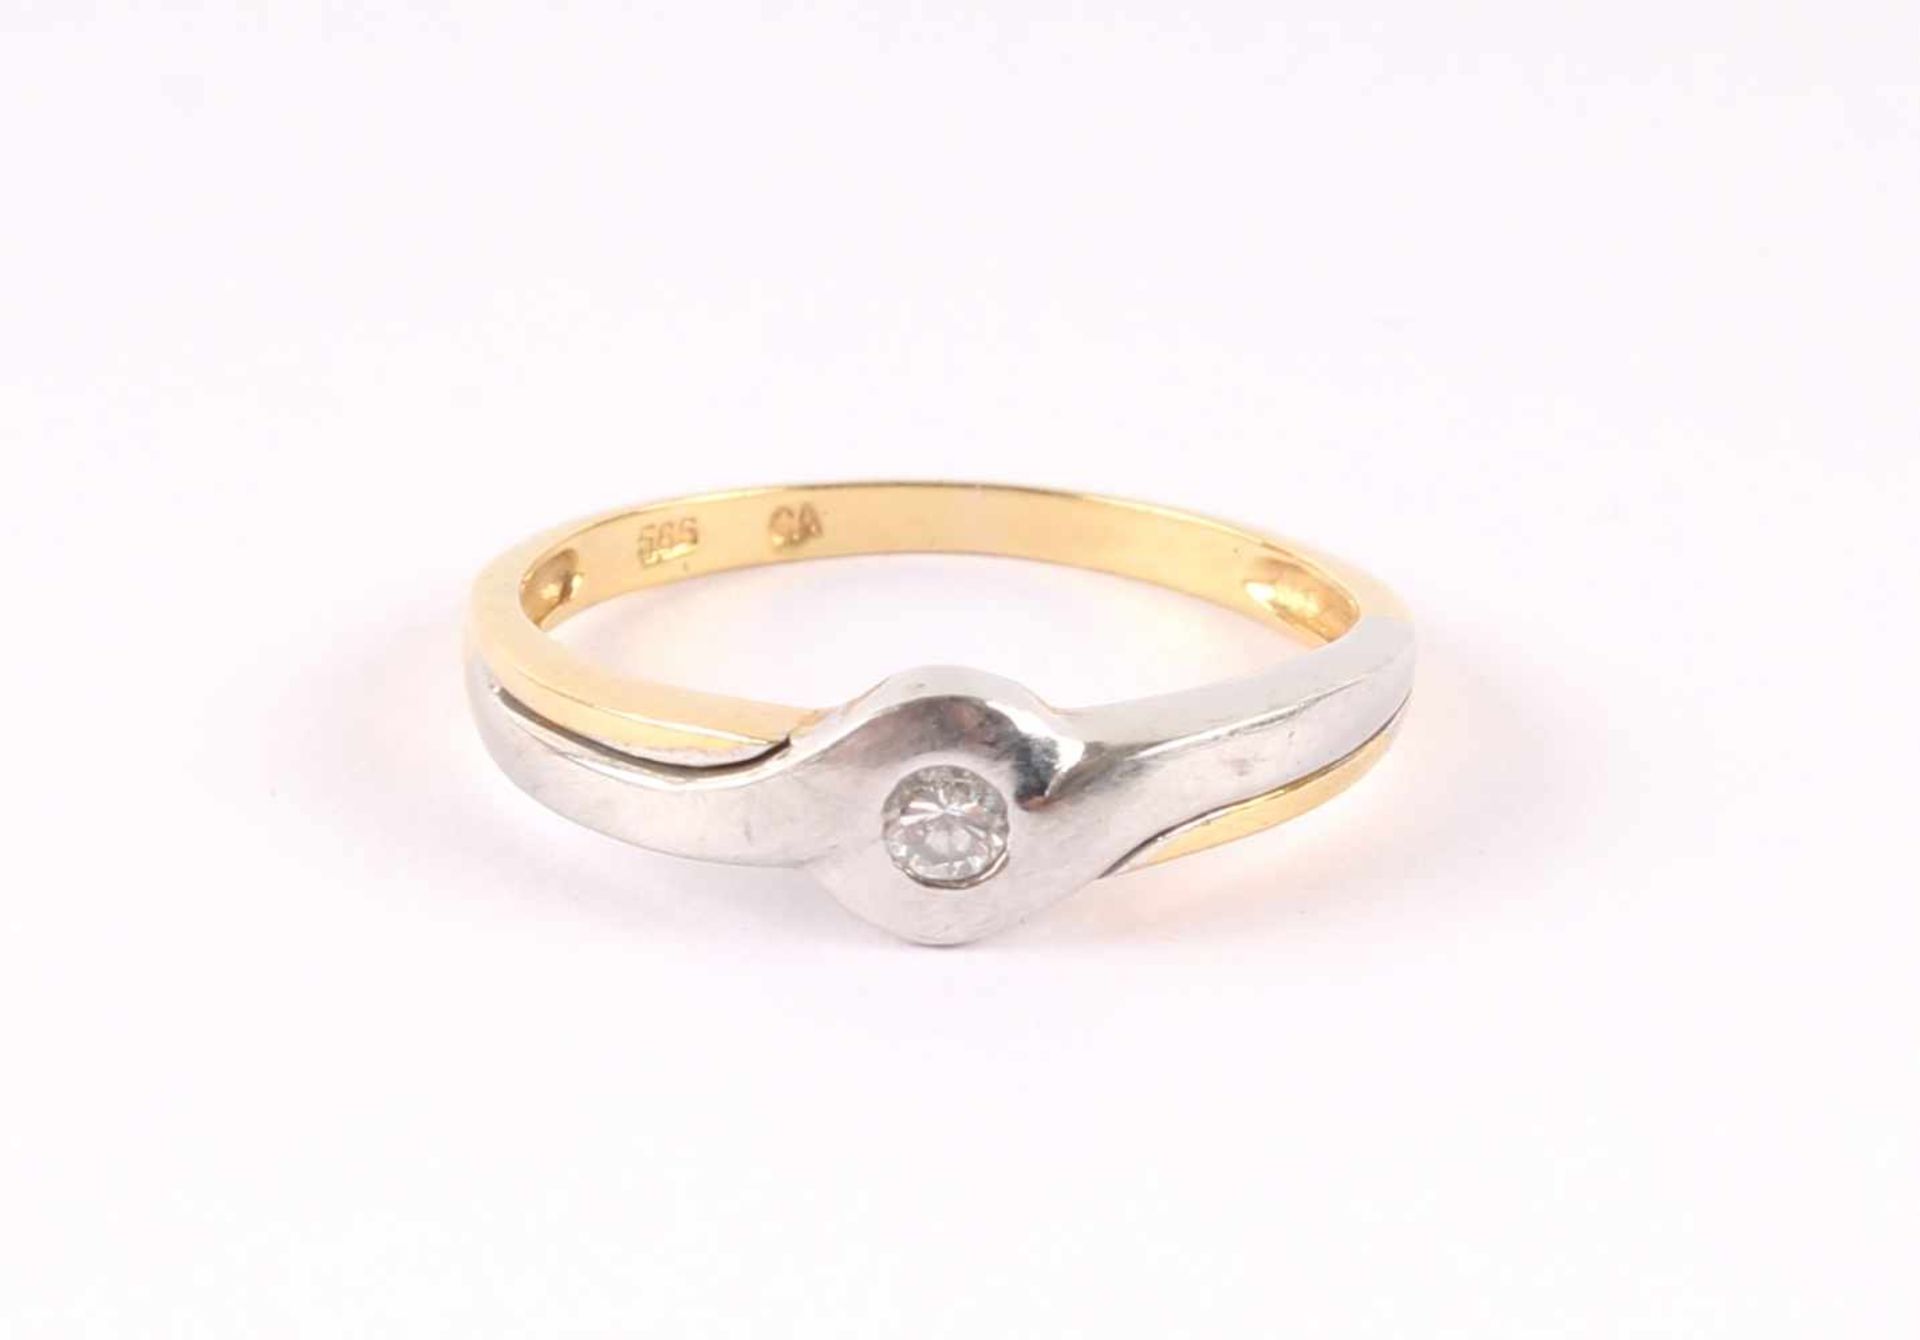 Solitär 585 Goldring mit Brillant, solitaire 585 gold ring with diamond,